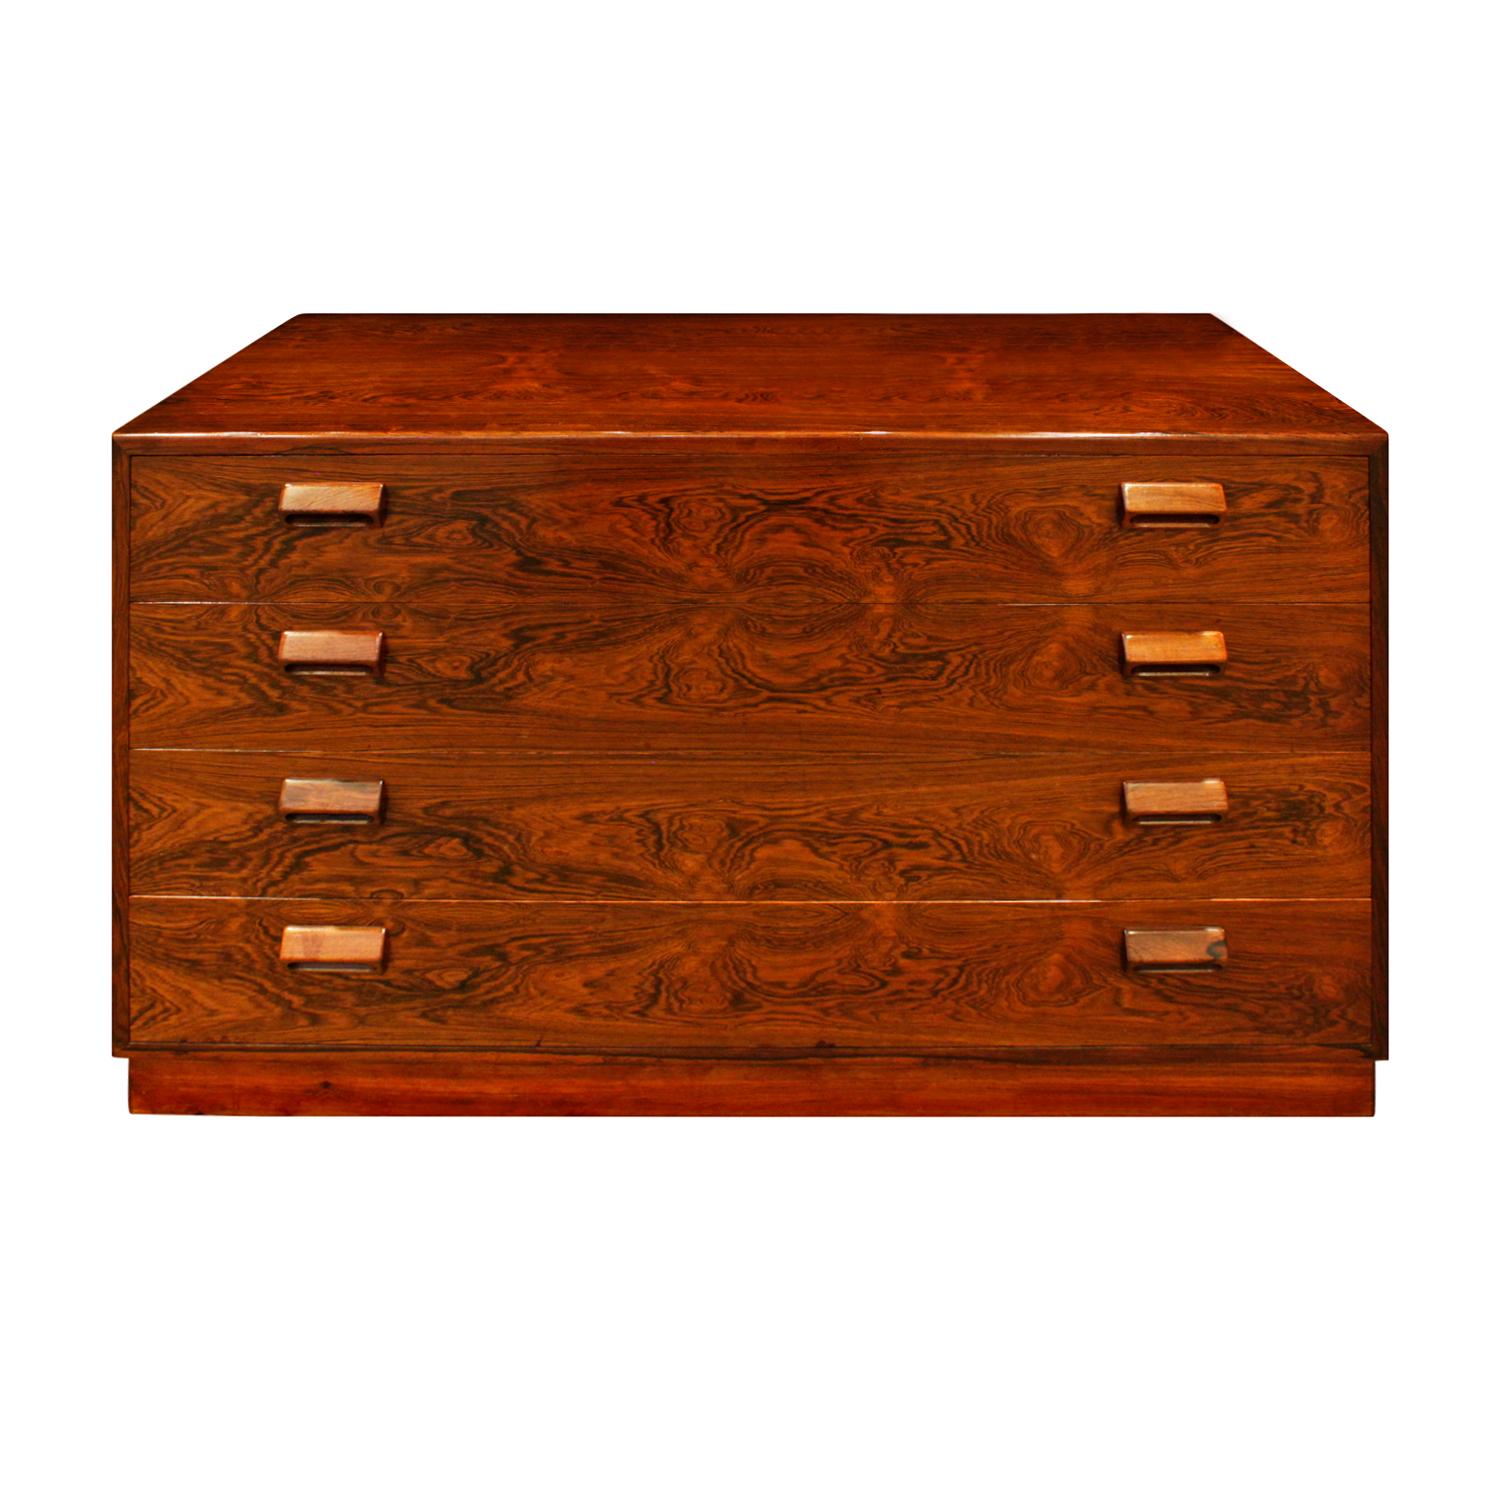 Pair of beautifully crafted bedside tables / chests in Brazilian rosewood with hand carved pulls, Denmark 1950s (stamped “Made in Denmark” on the back). These bedside chests are exquisitely made and very luxurious.